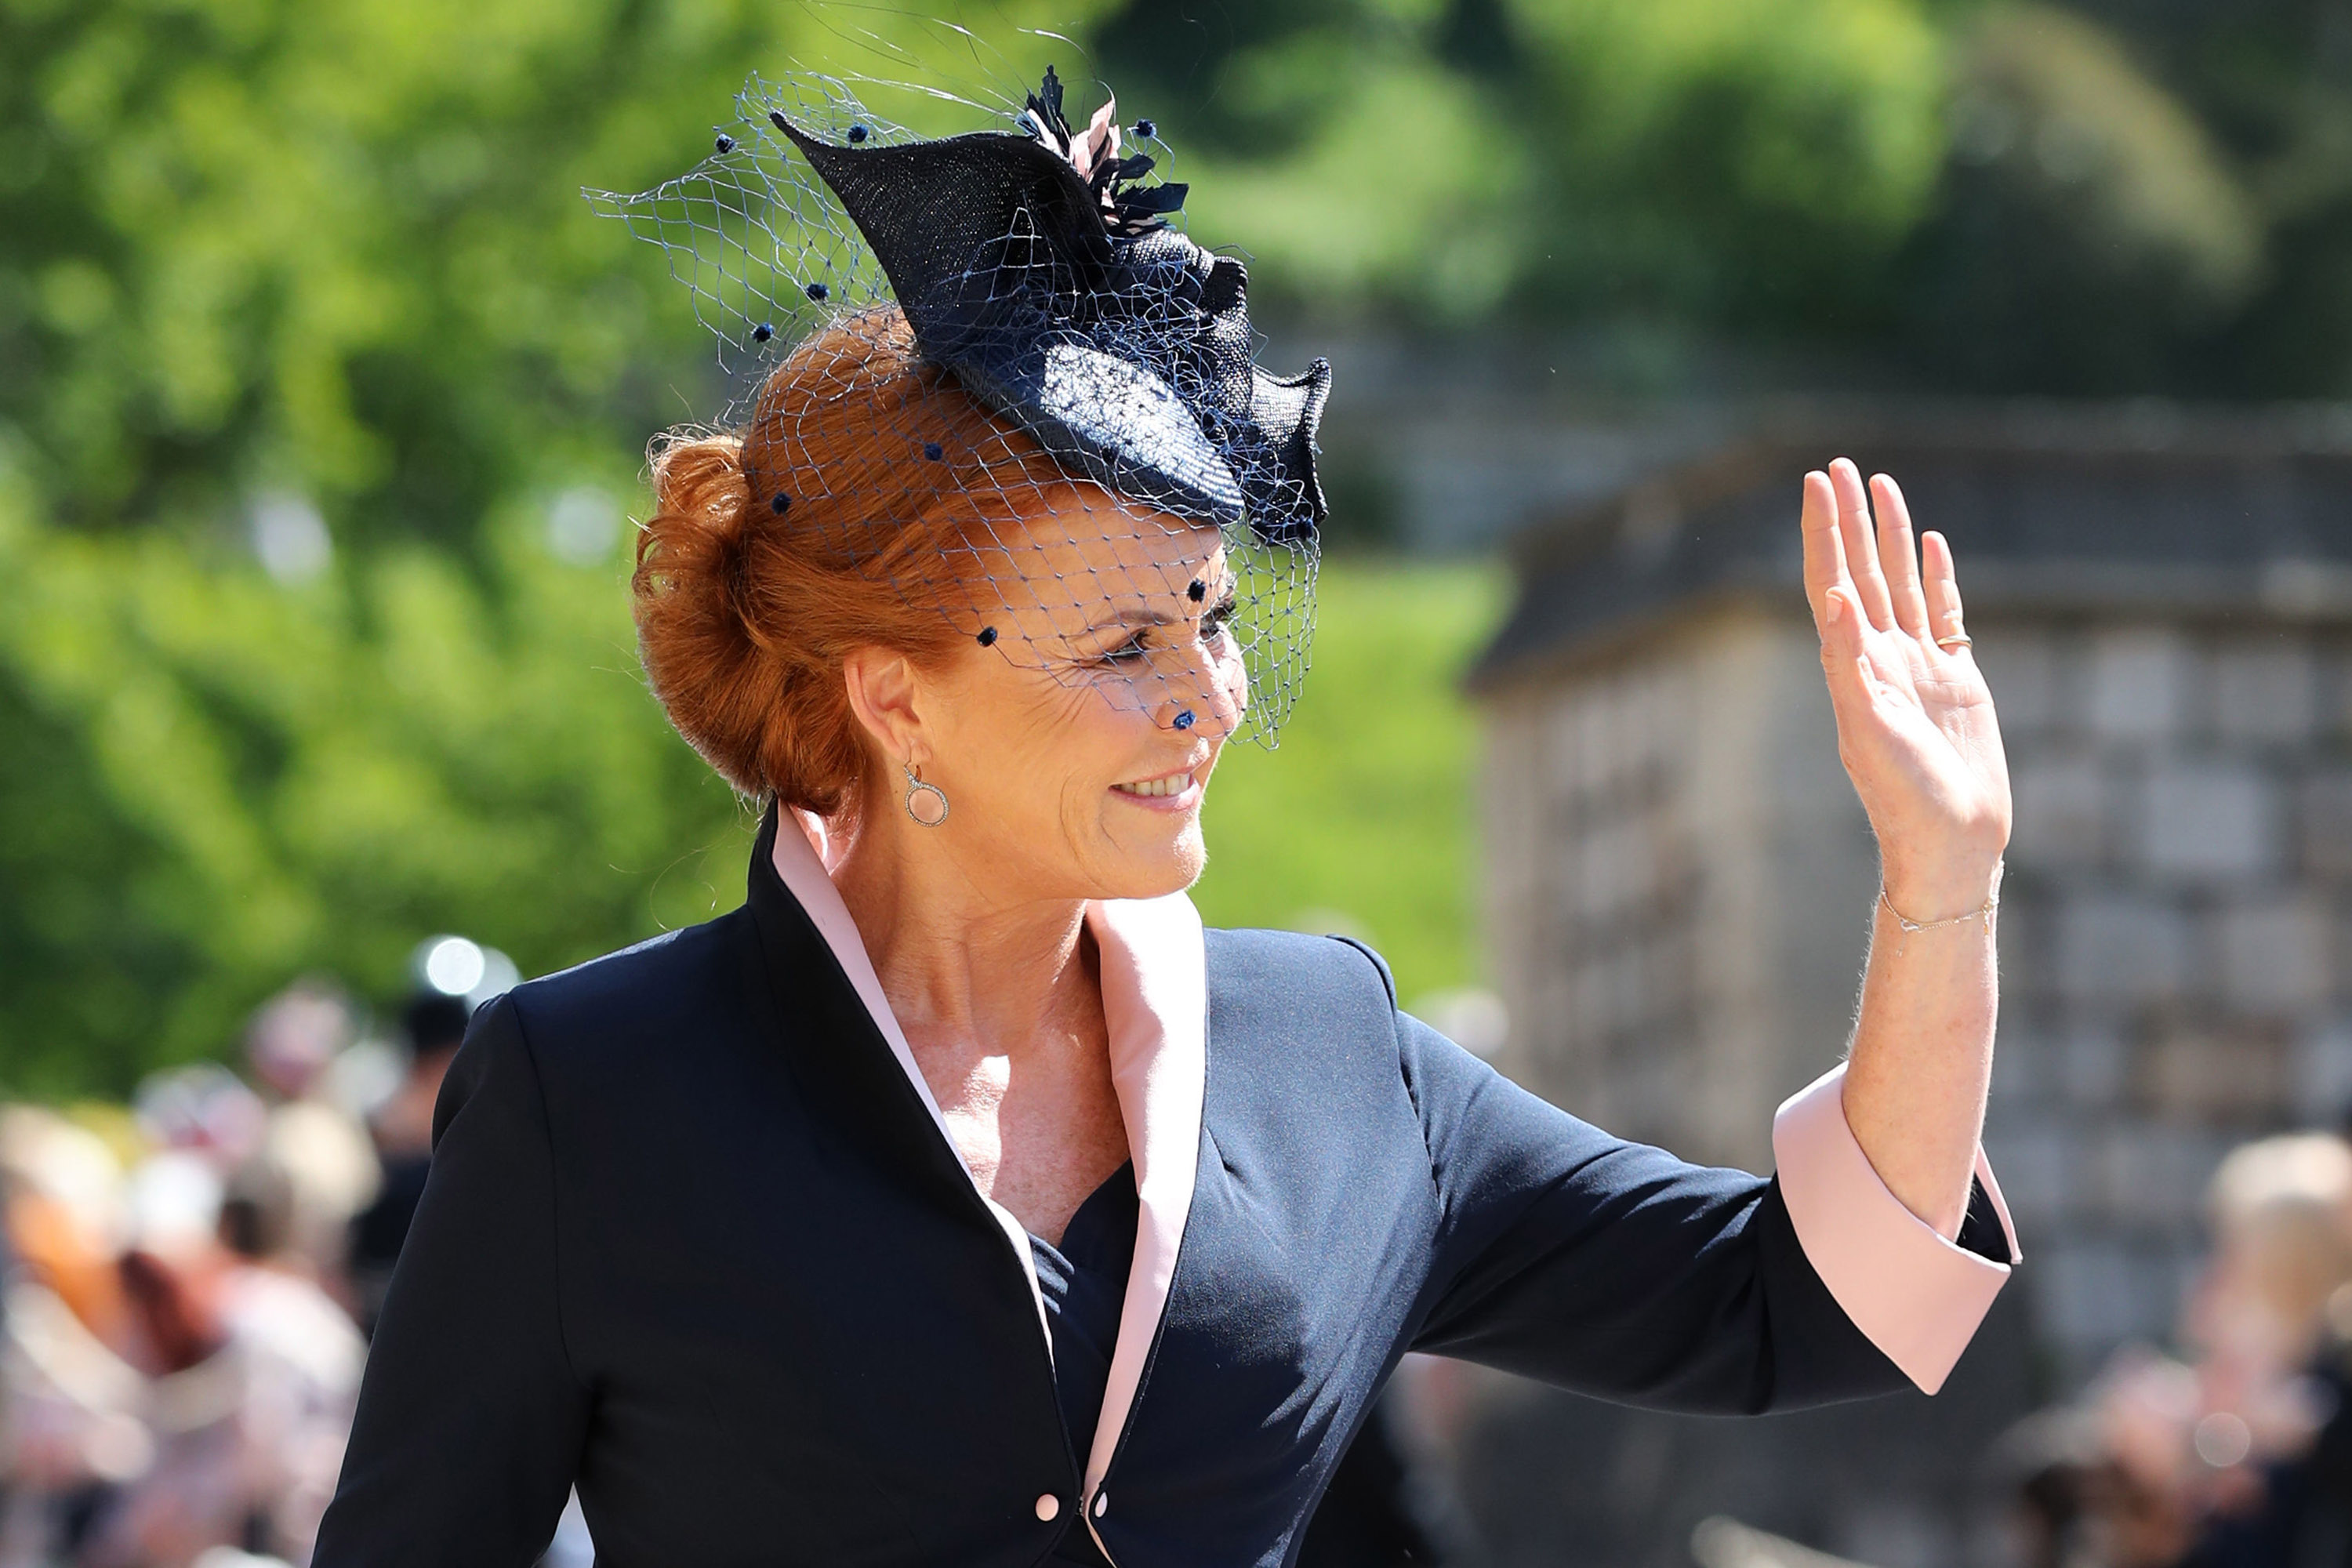 Sarah Ferguson, Duchess of York, at Prince Harry and Meghan Markle's wedding in 2018 | Source: Getty Images